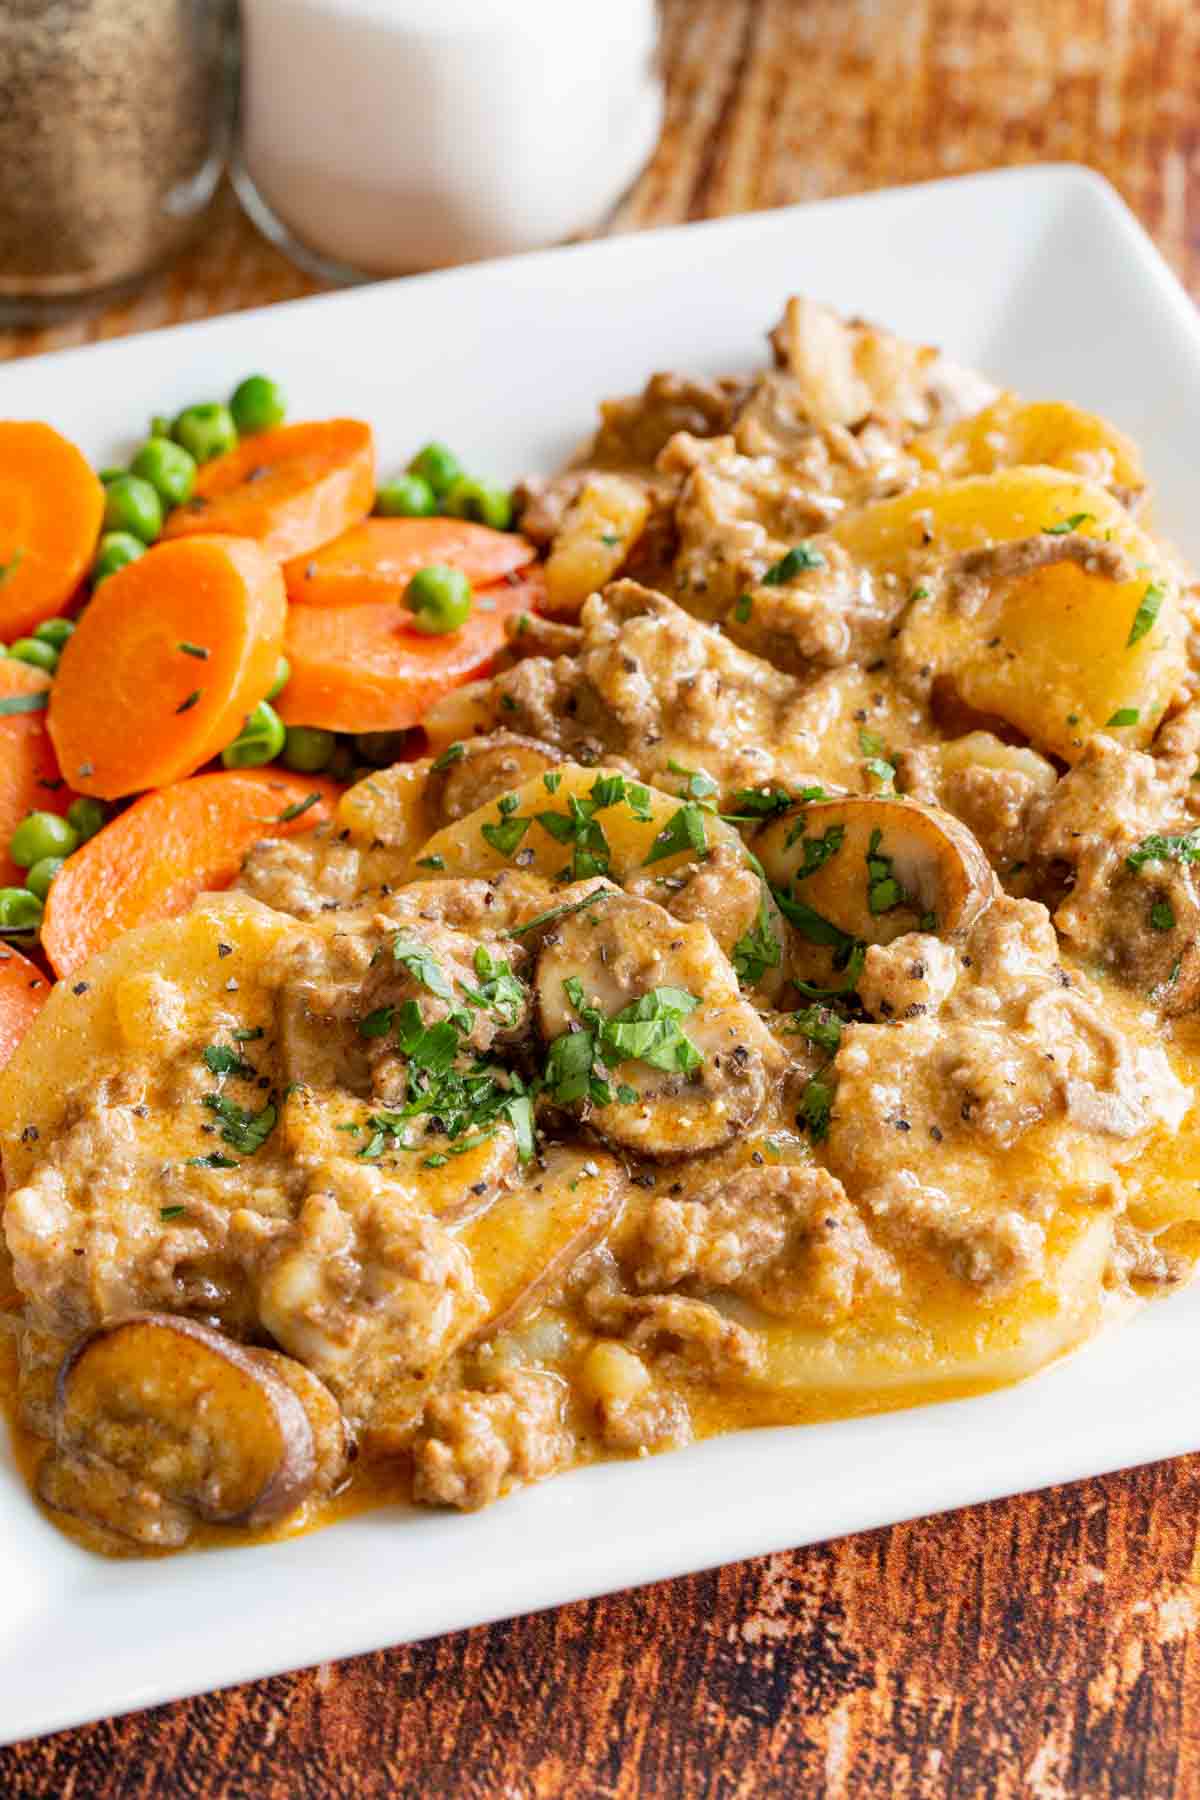 Ground beef and potatoes with mushrooms in a creamy sauce served on a white plate with peas and carrots.